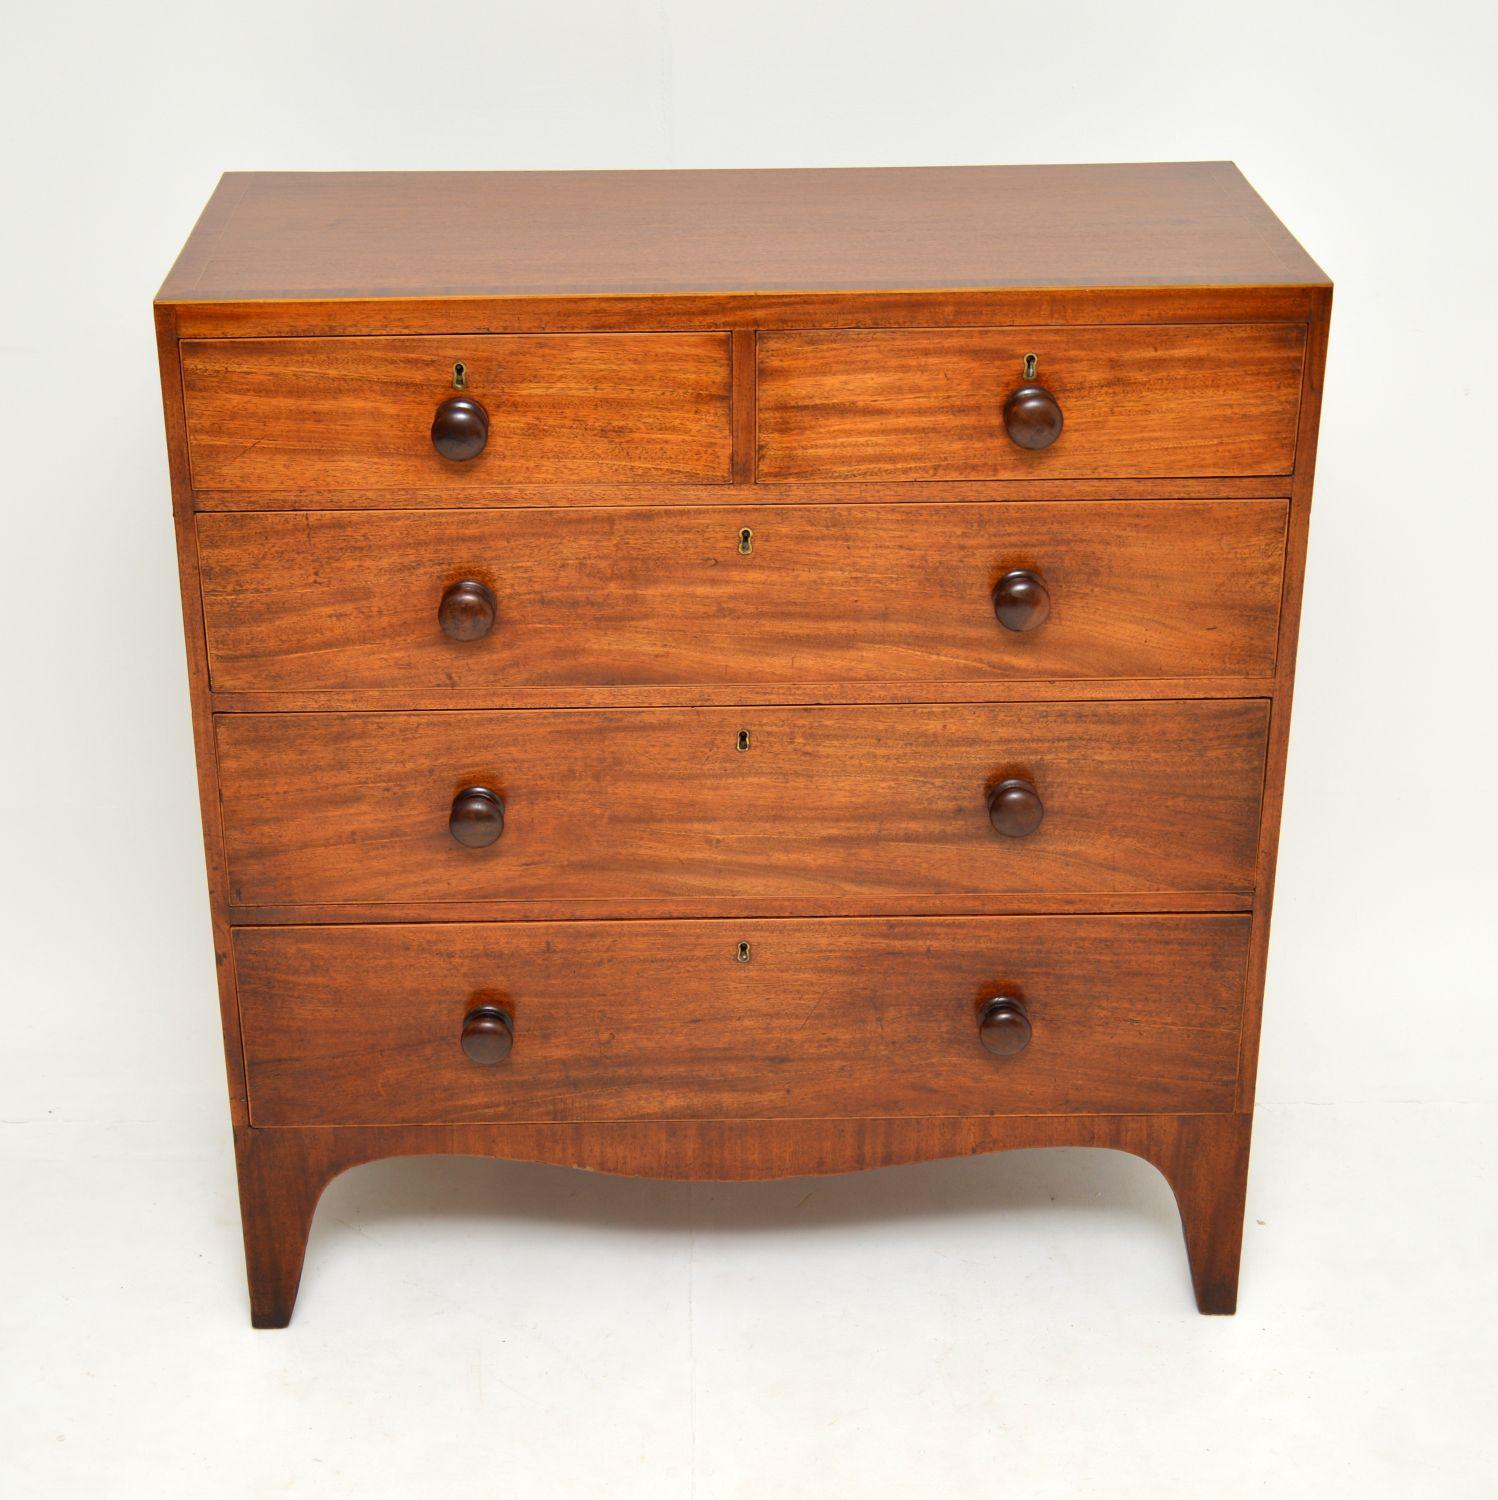 A very refined looking antique late Georgian chest of drawers in mahogany, dating from circa 1820s period.

It is of superb quality and is a great size. The mahogany has a wonderful patina and plenty of character. It has an inlaid and cross banded